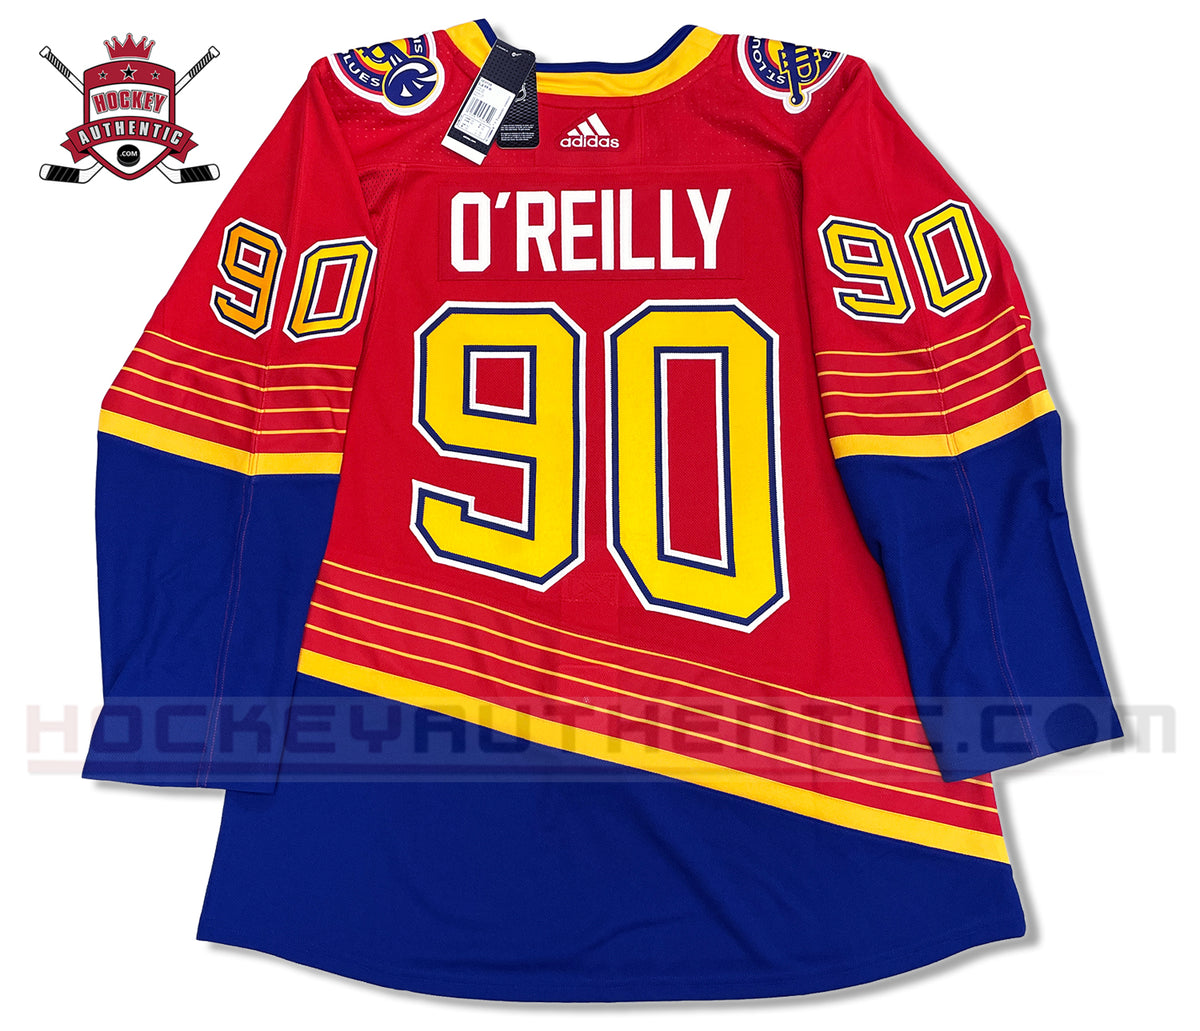 Men's adidas Ryan O'Reilly Blue St. Louis Blues Home Authentic Player Jersey